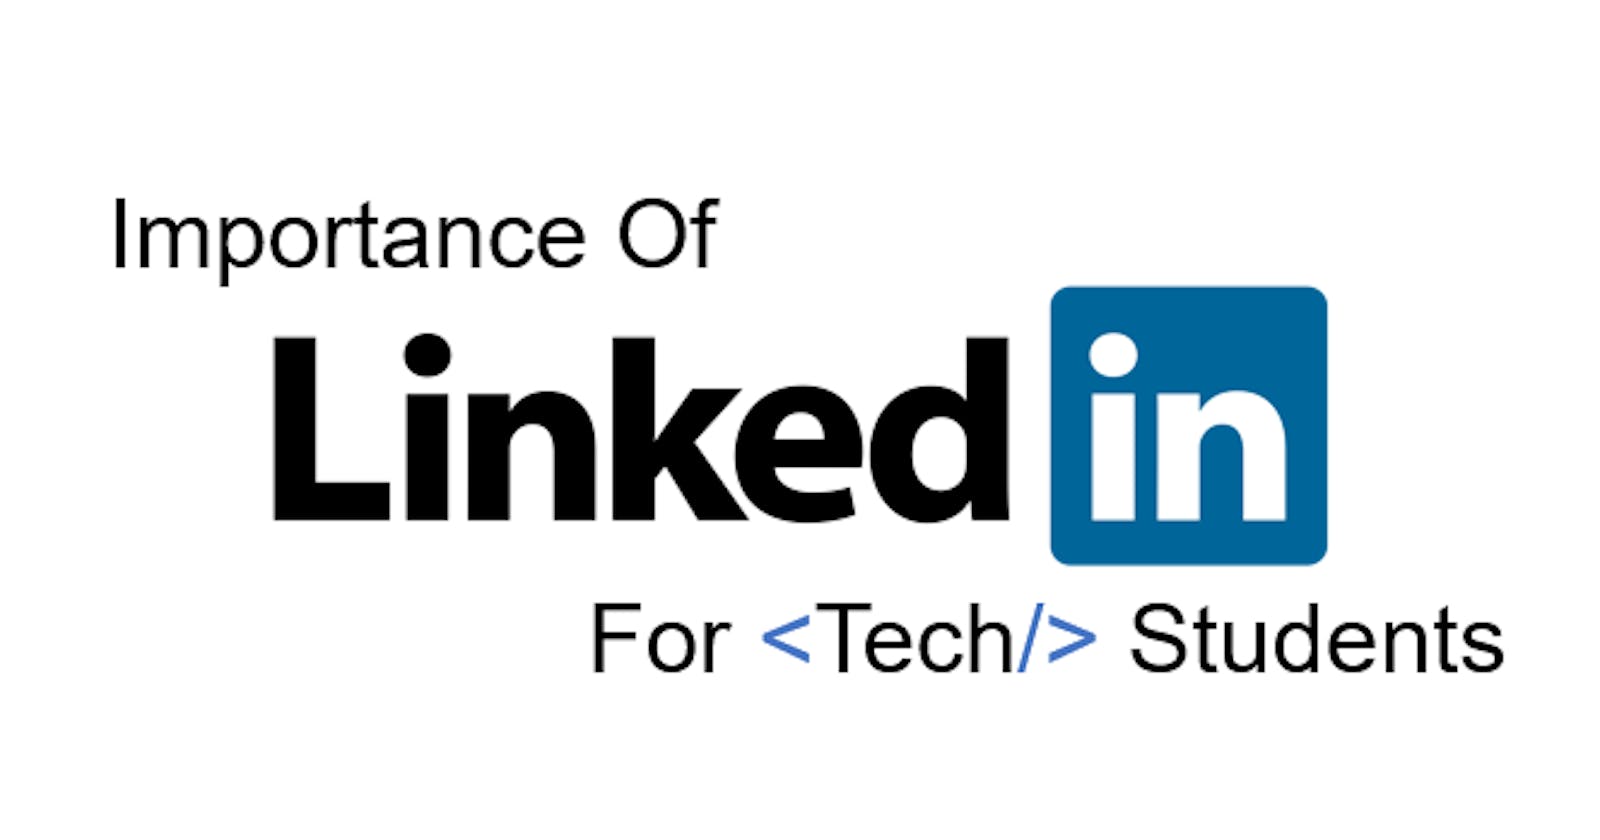 Importance Of LinkedIn For Tech Students